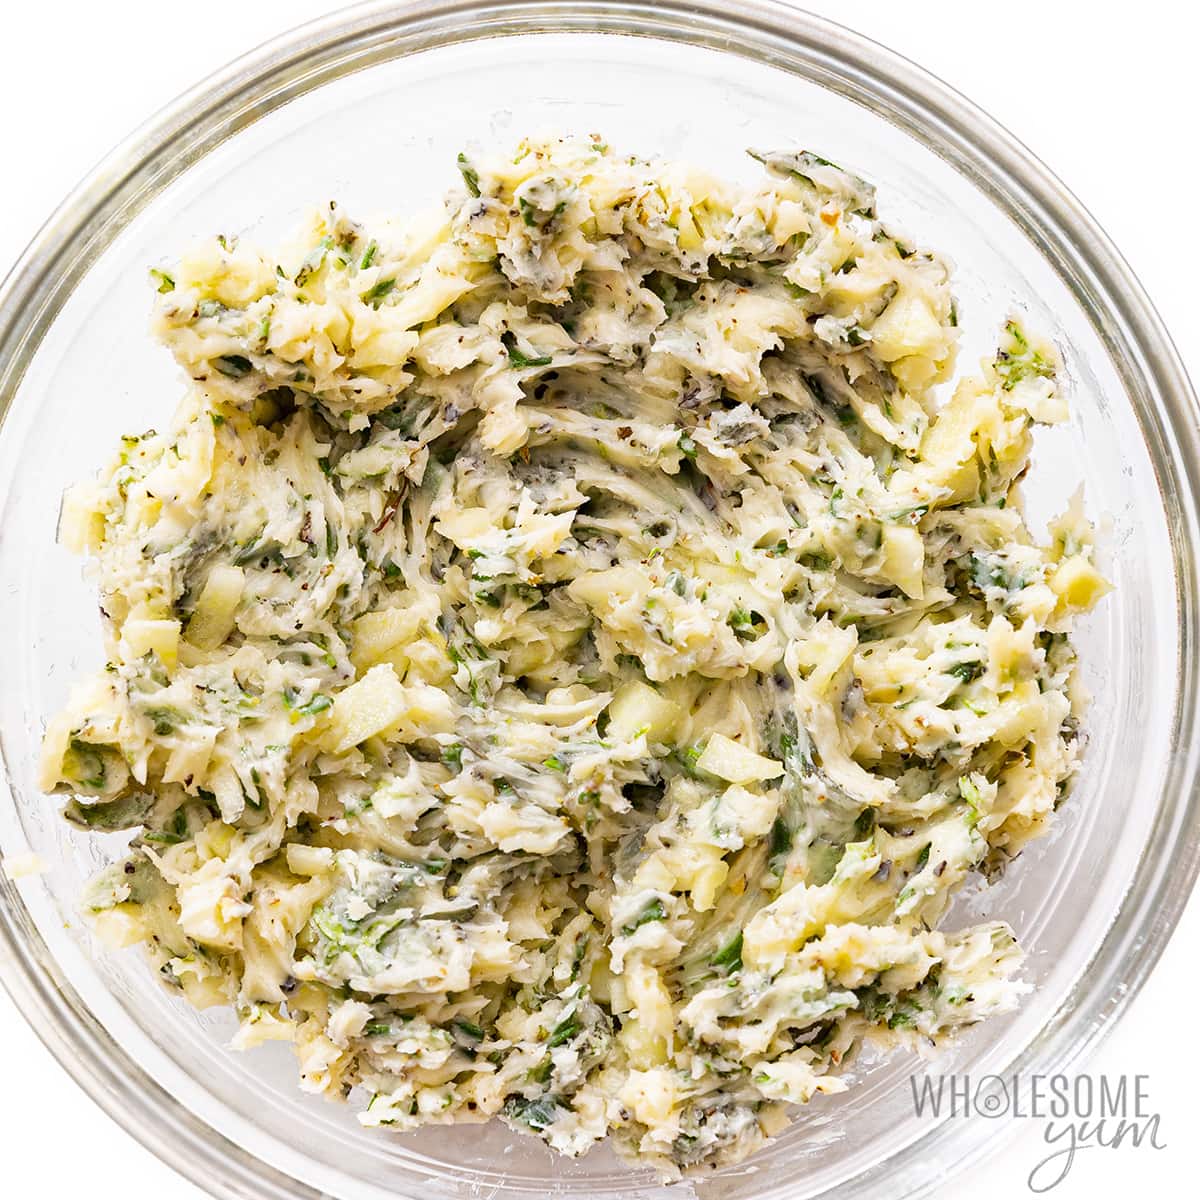 Herb butter in a bowl.